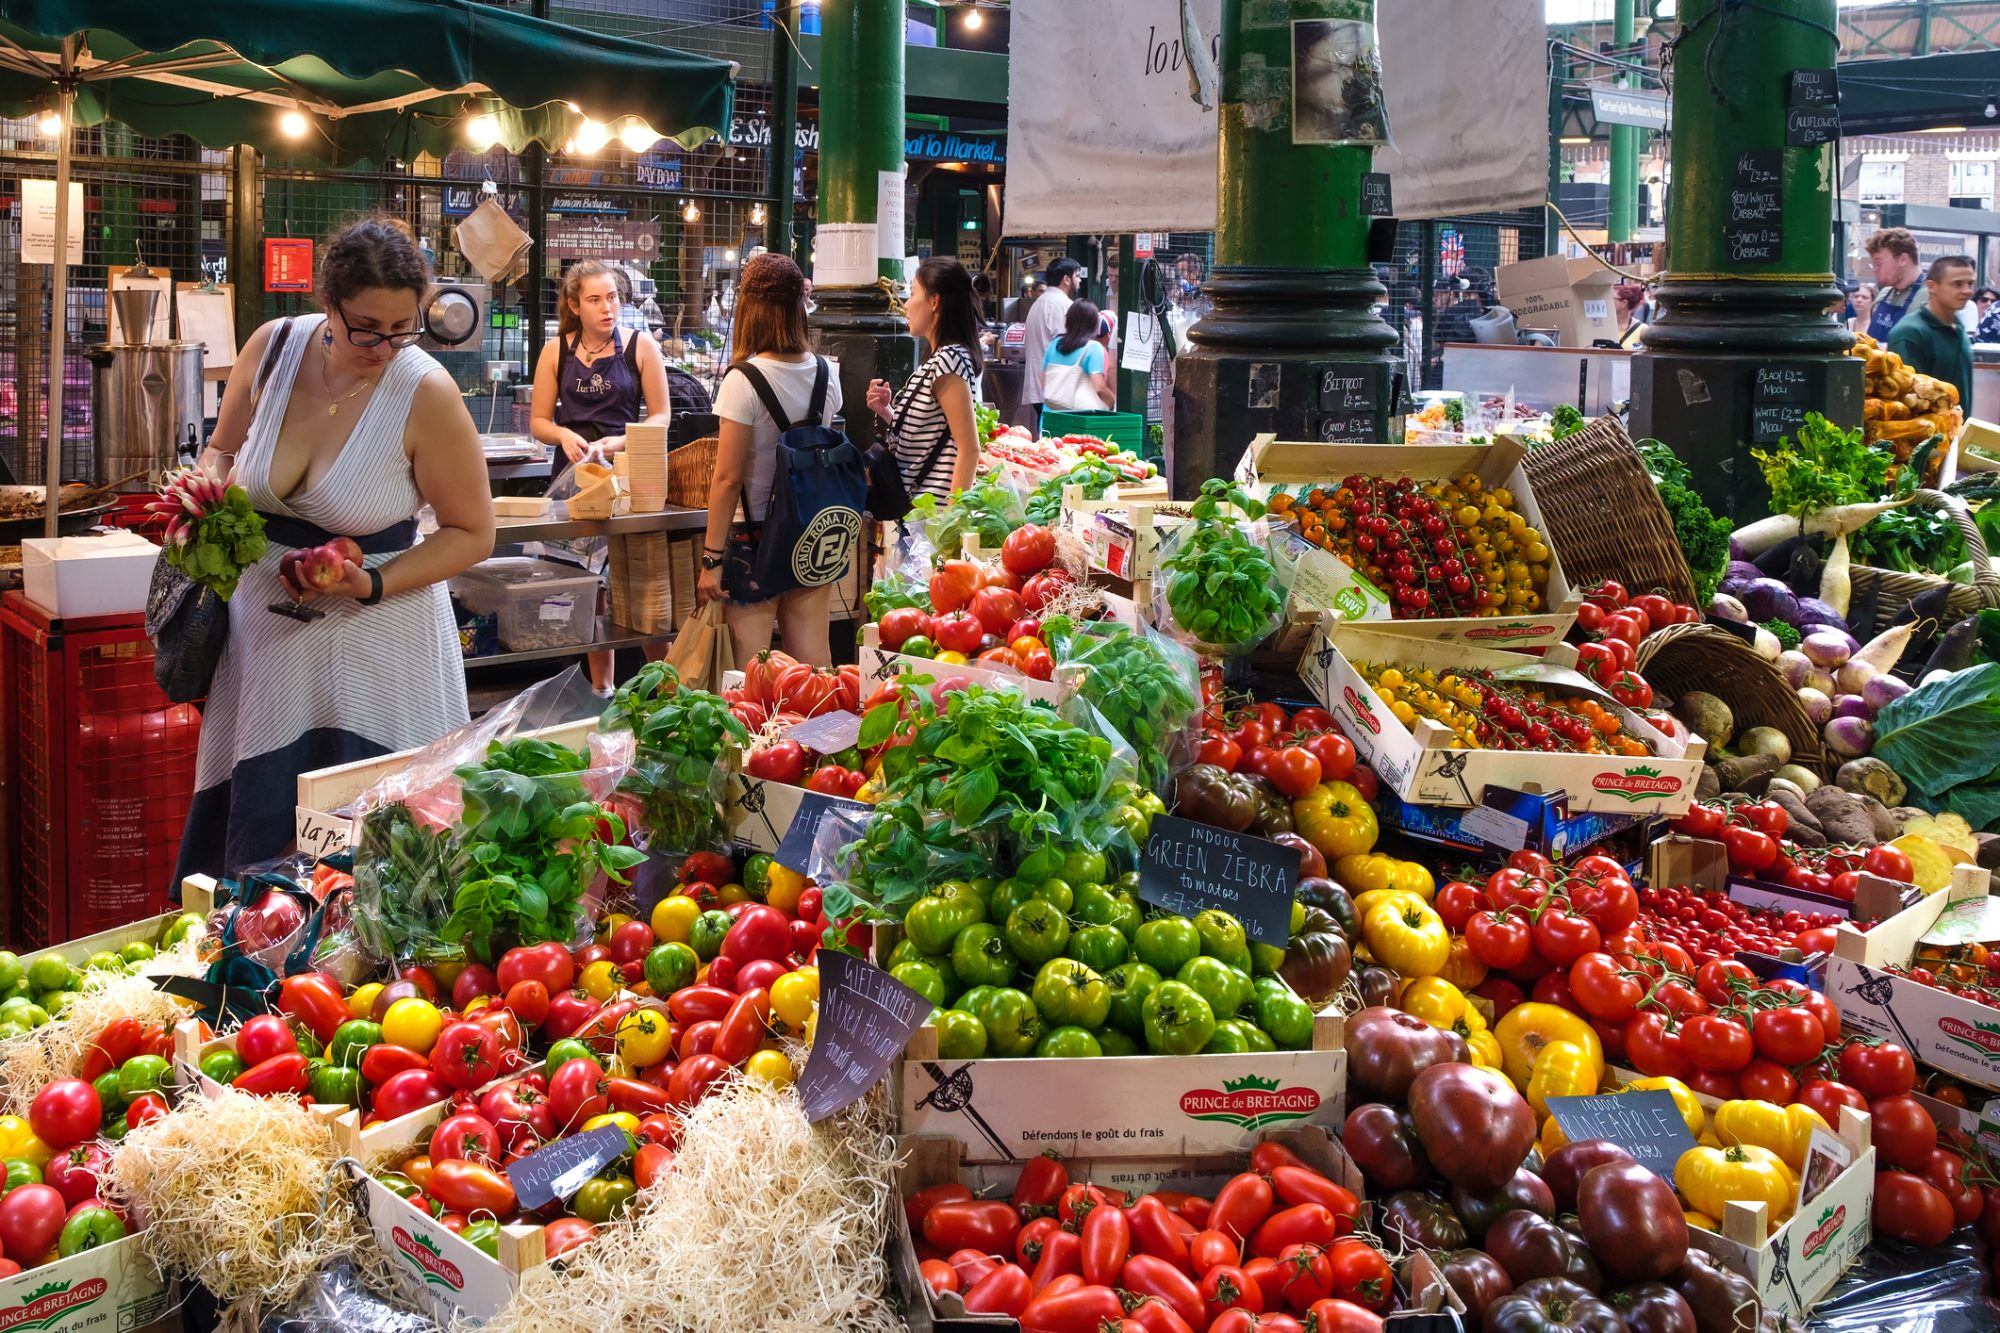 local market selling produce in London